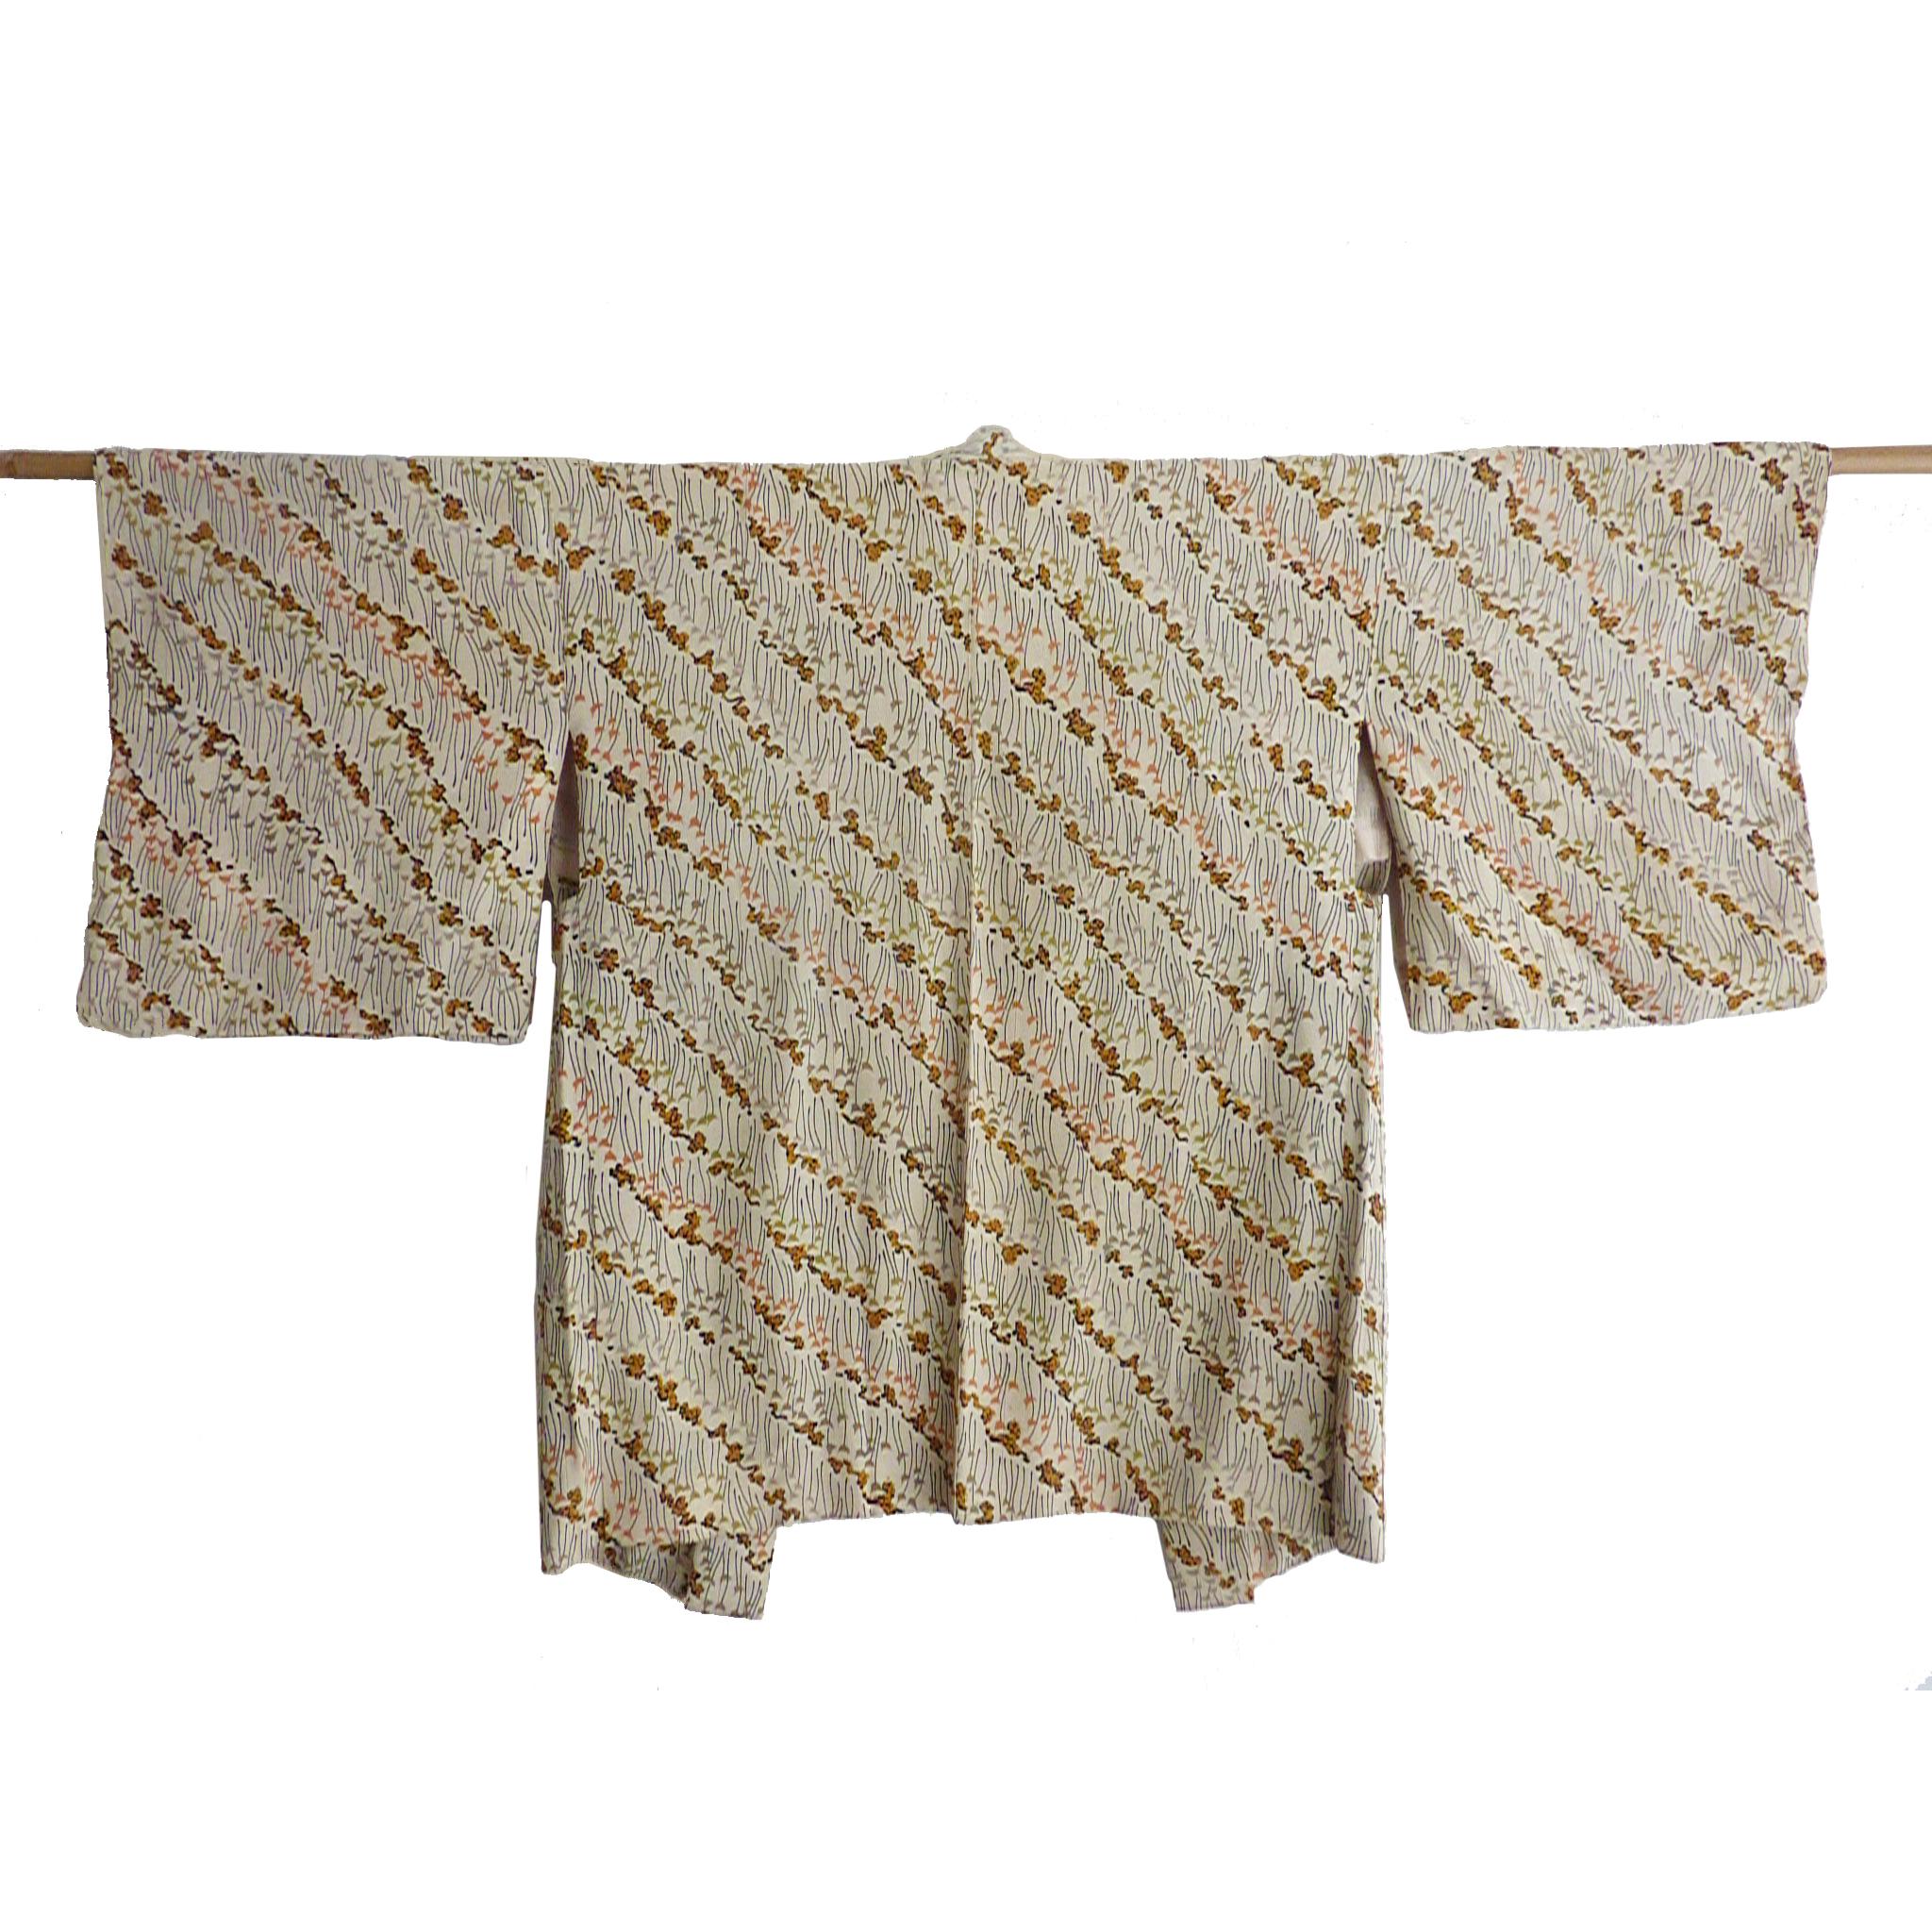 Circa: MEIJI 1890
Place of Origin: Japan
Material: Silk
Print: Wheatgrass
Condition: Excellent
Wheat-ground printed all silk kimono is hand-sewn and handmade in Japan.
 
Total length 34